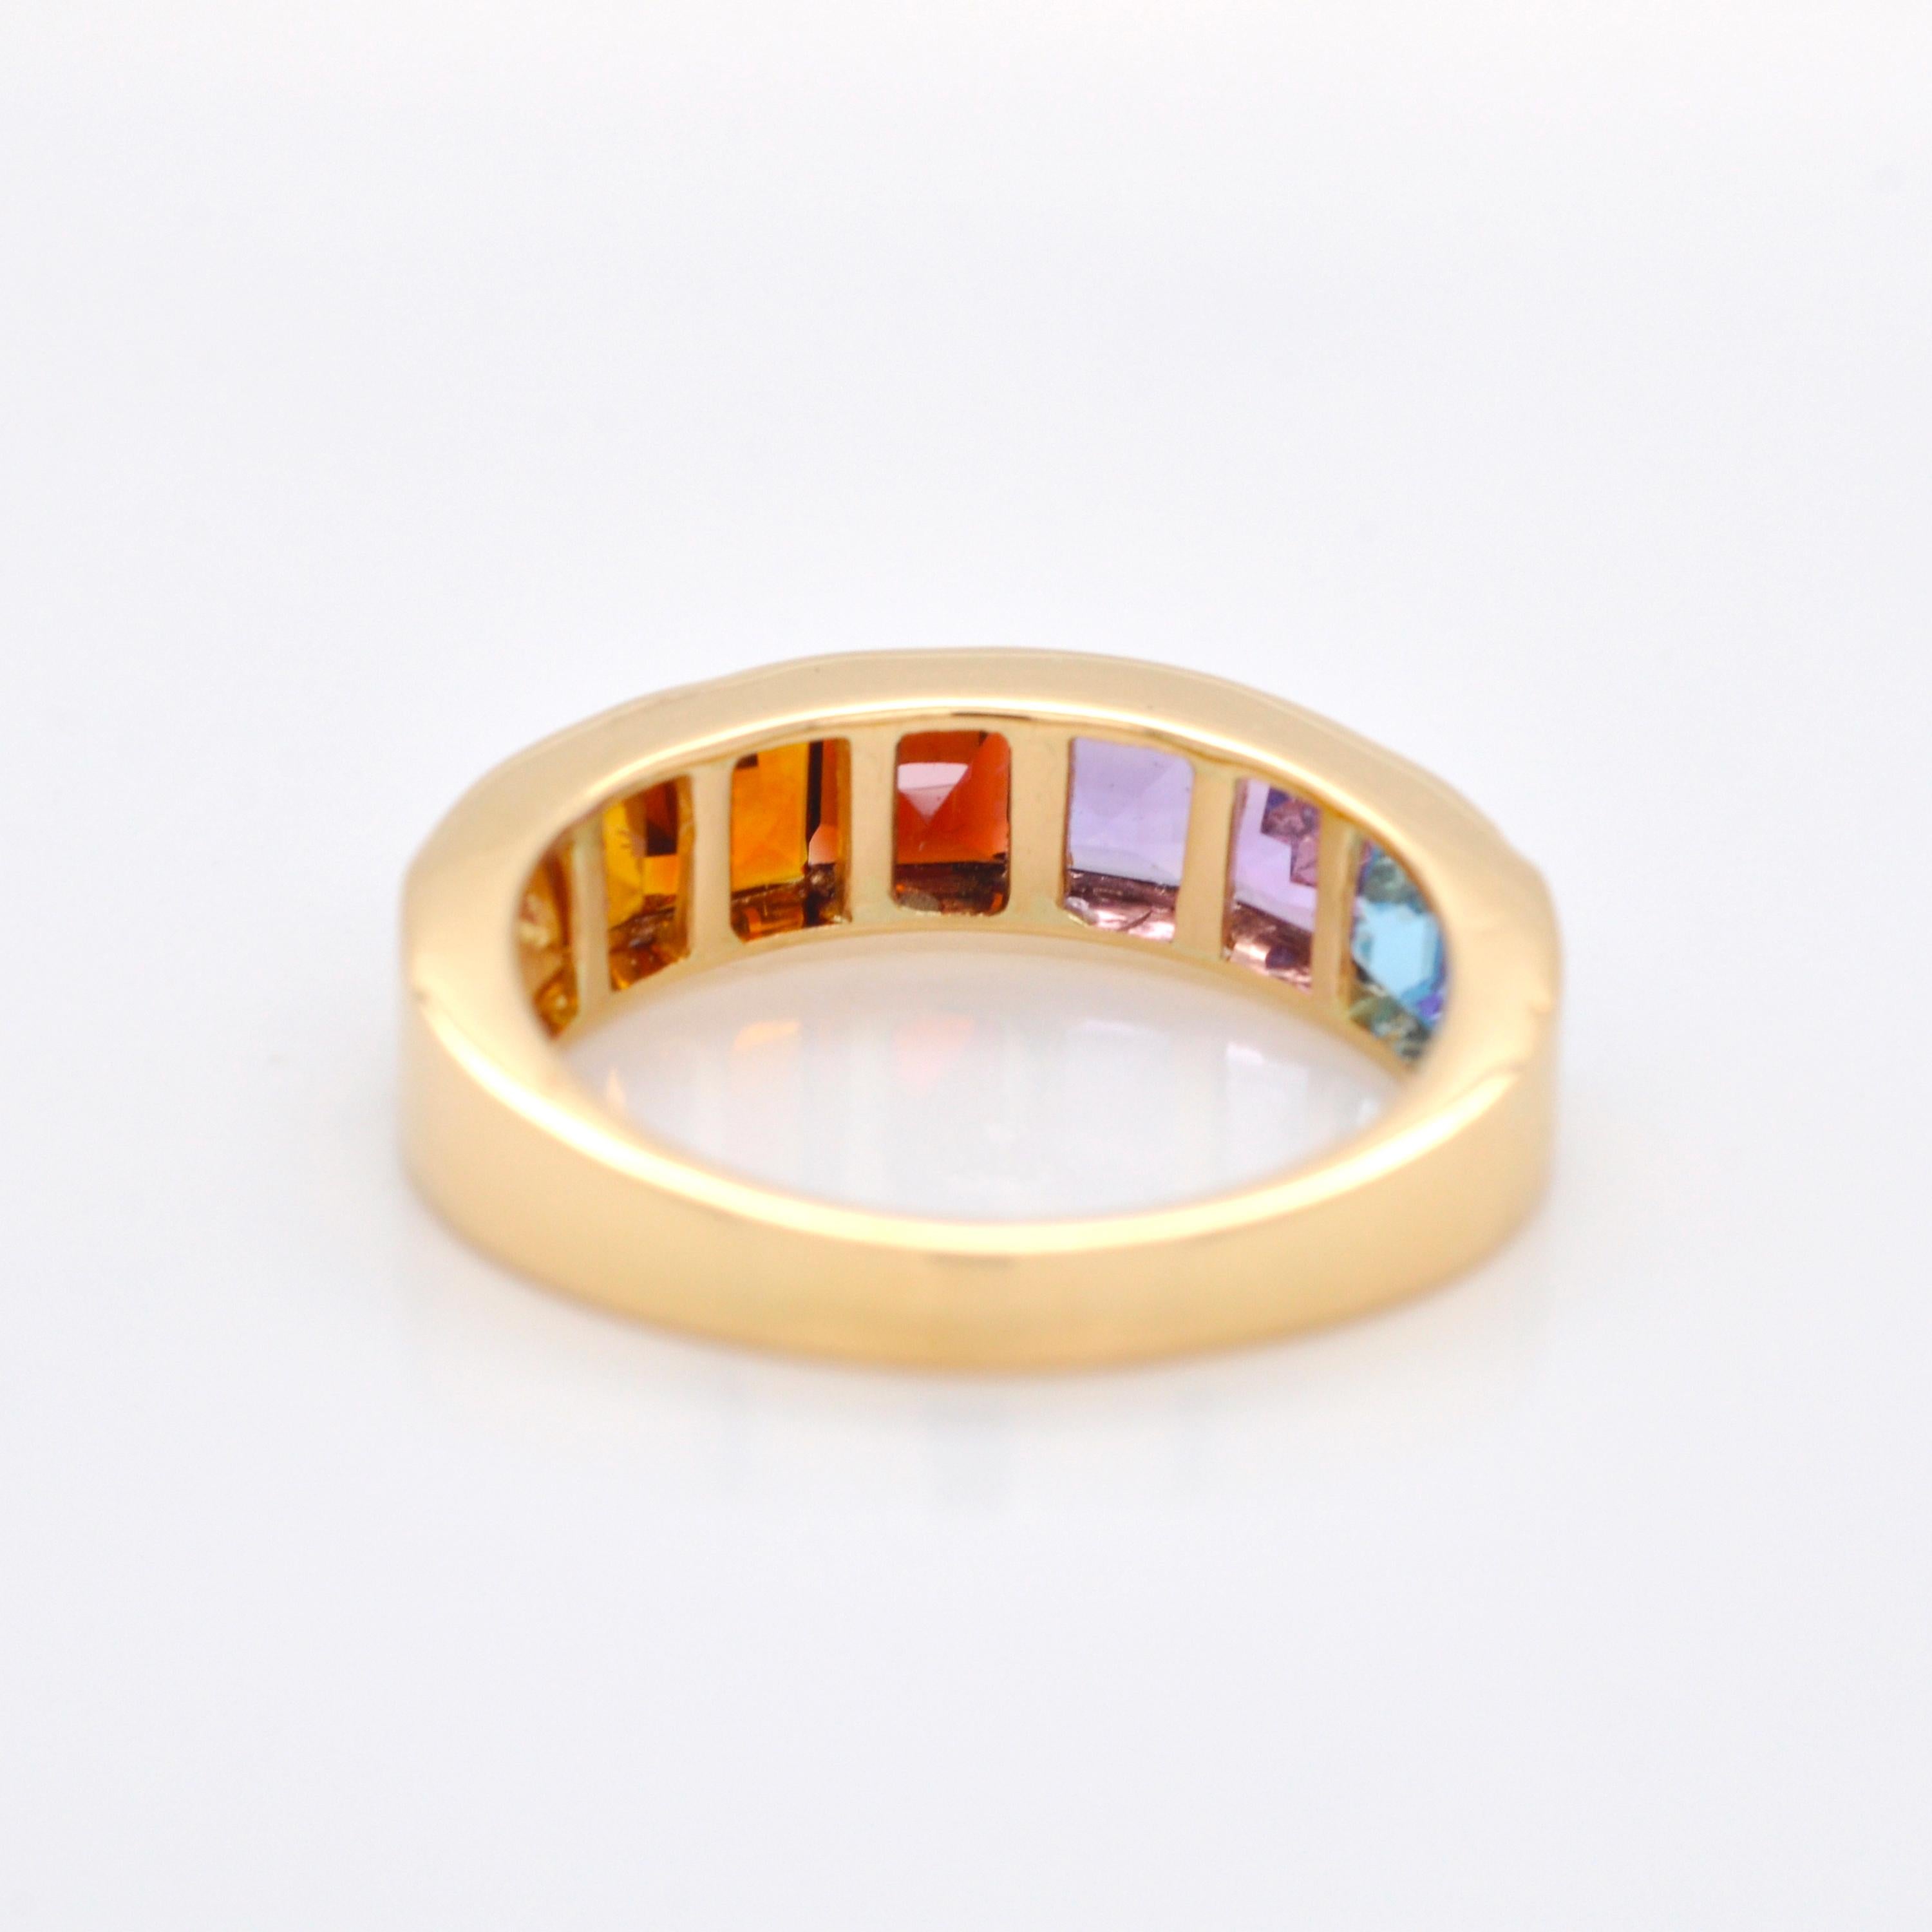 For Sale:  18K Gold Channel-Set 4 MM Square Rainbow Gemstones Eternity Half Band Ring 6